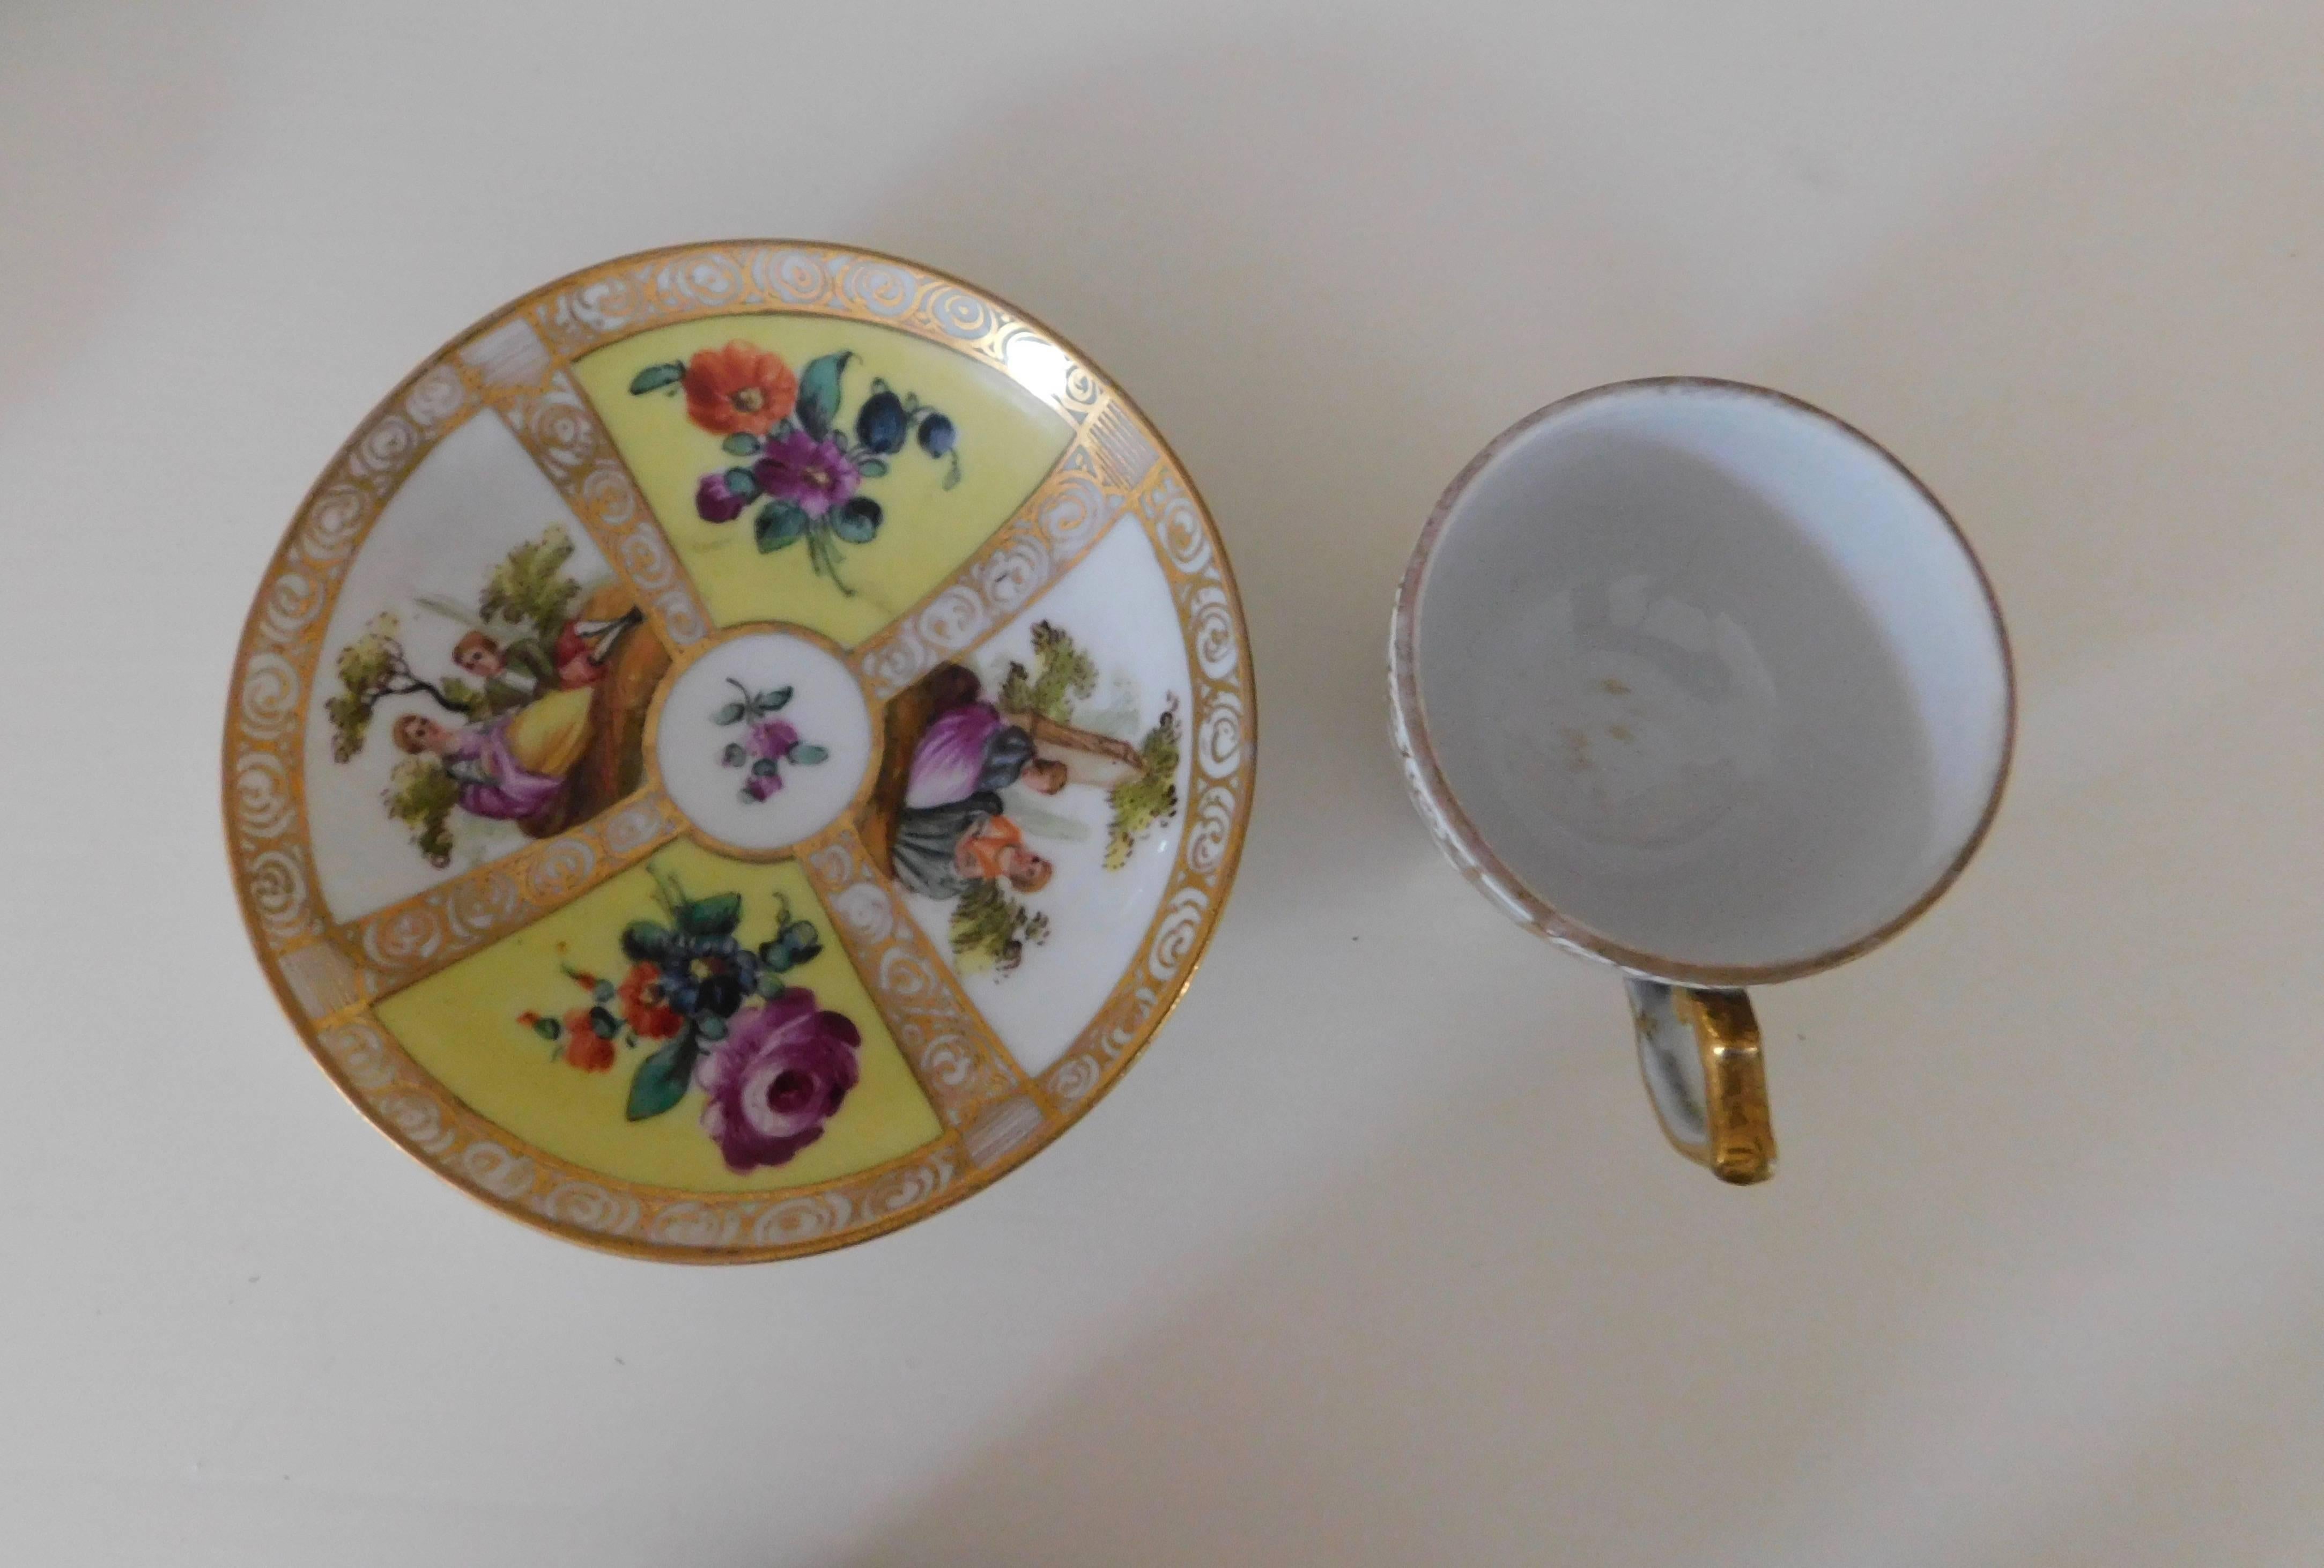 19th Century Meissen Porcelain Chocolate Cup, Lid and Saucer 1